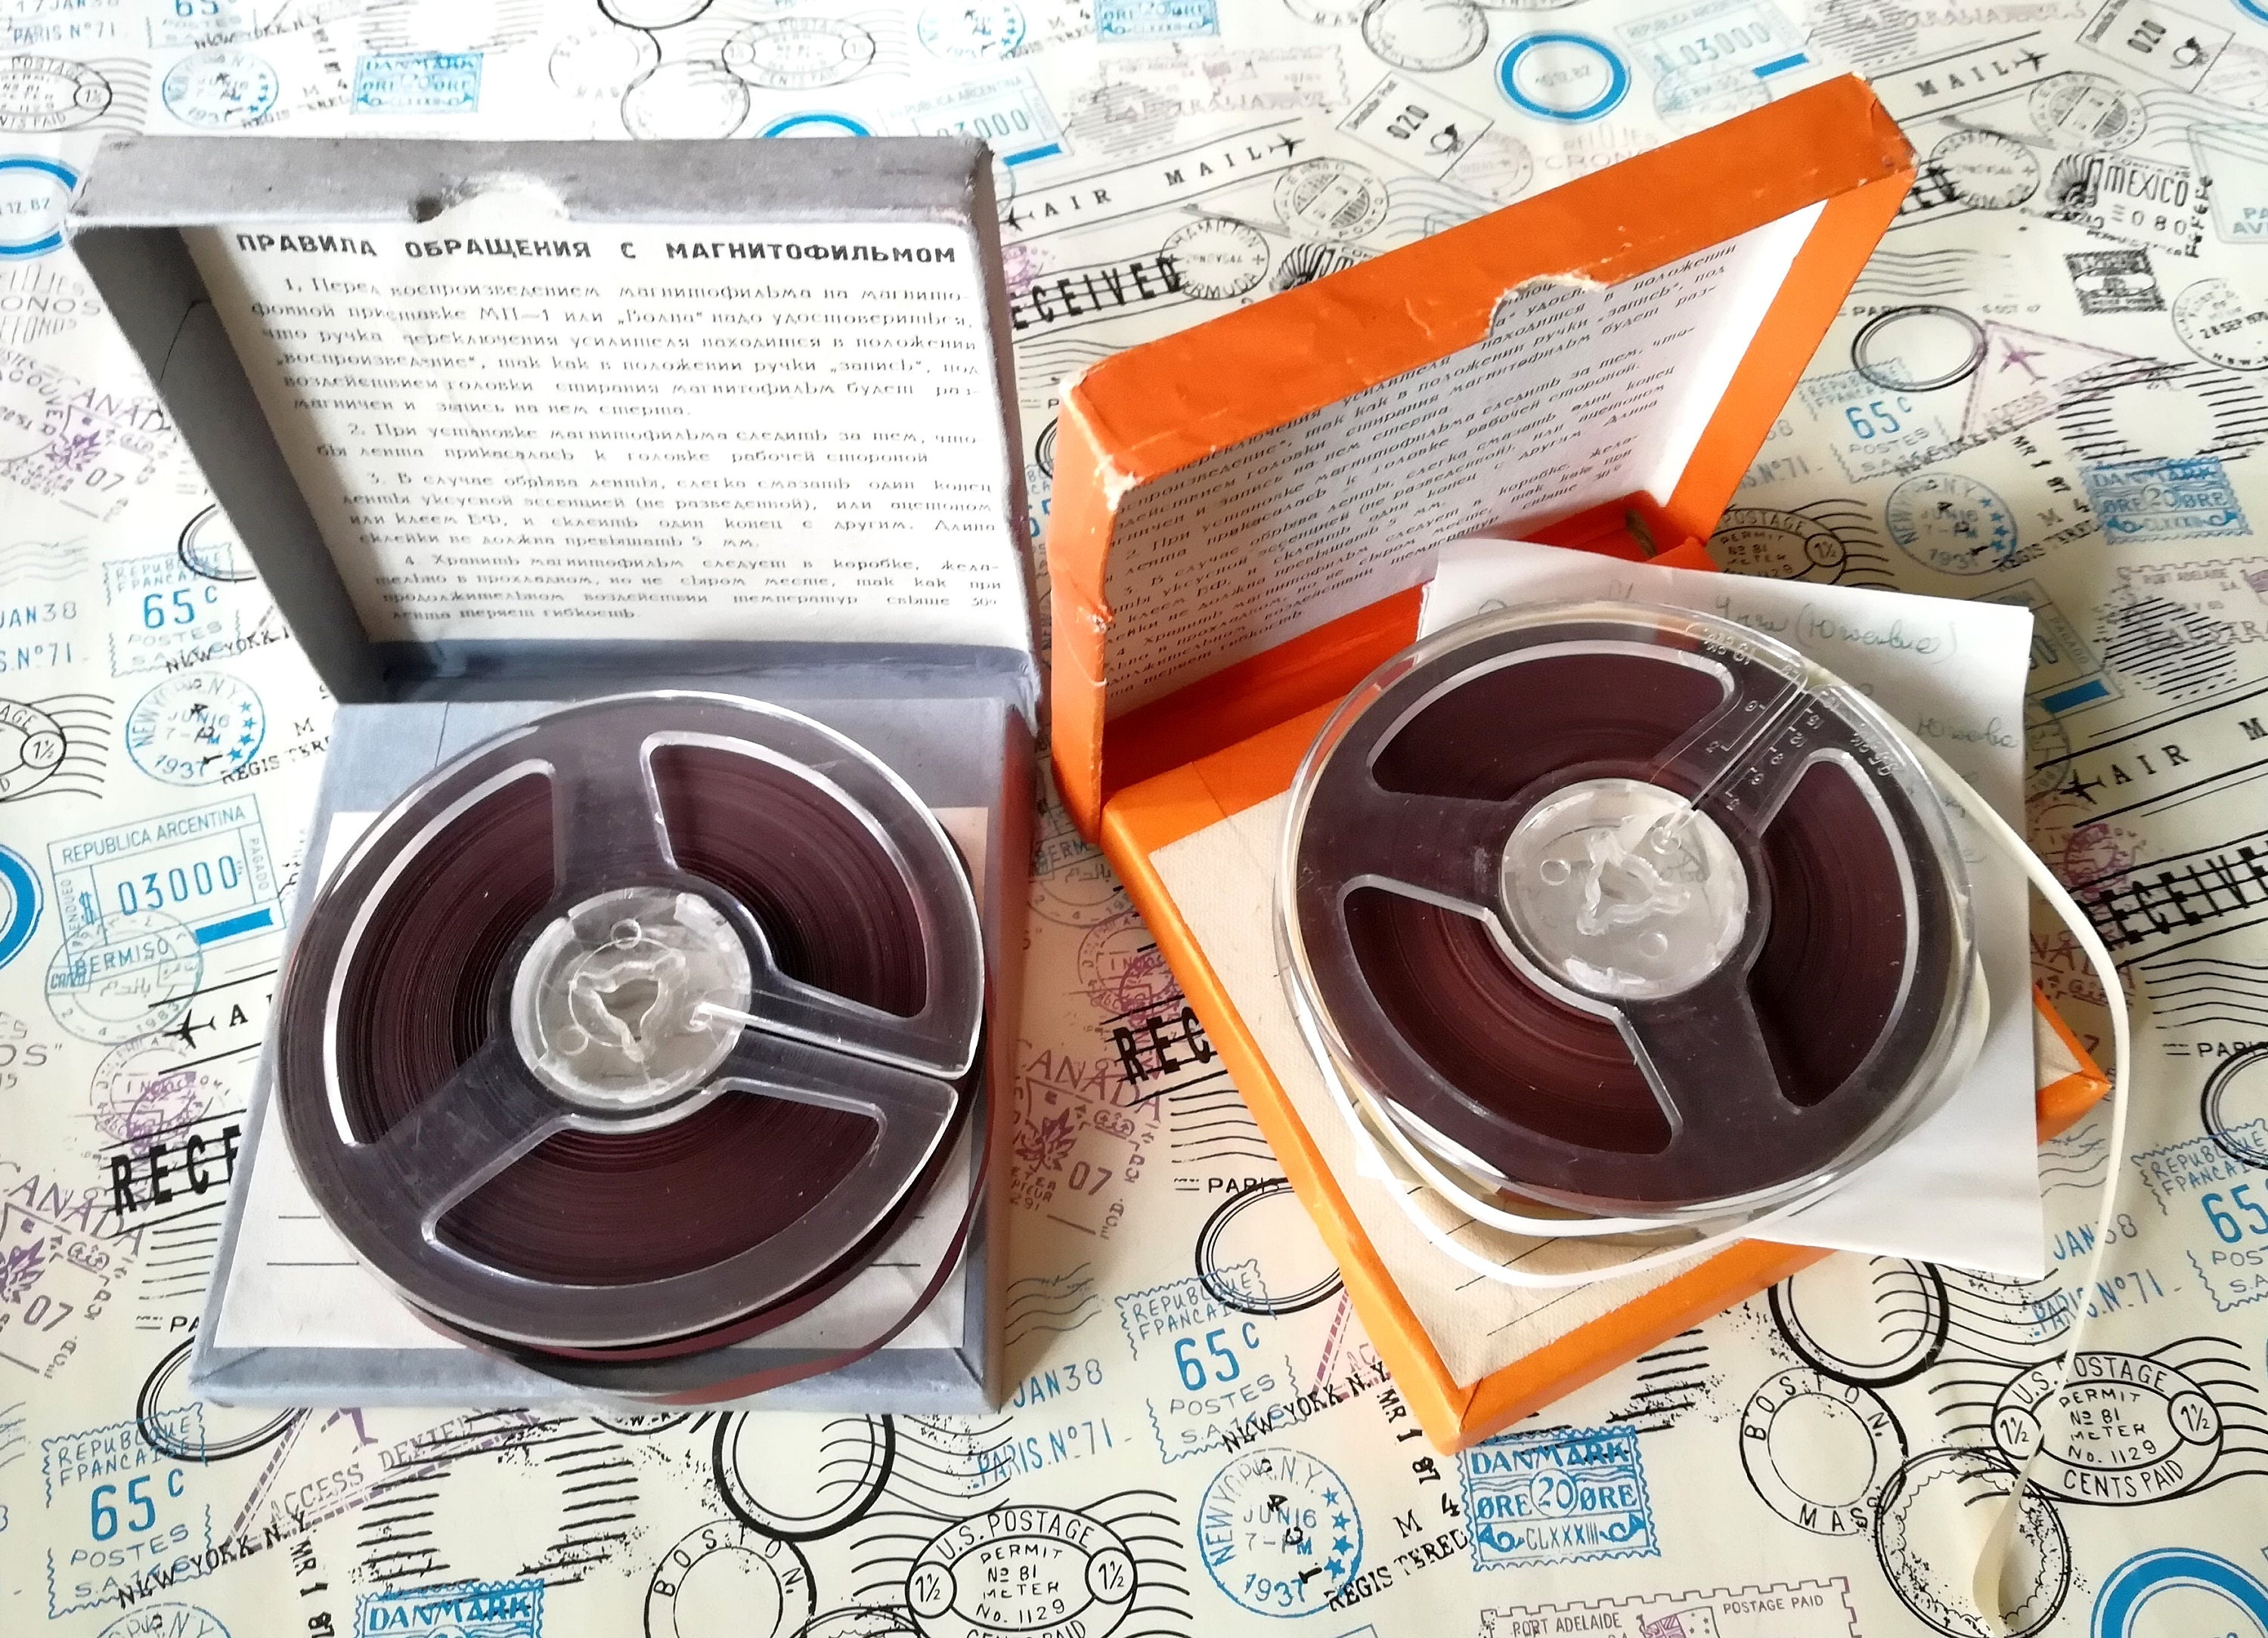 4'' Vintage Recording Magnetic Tape in Box, Cardboard Box, 2pcs  Magnetophone Recording Tapes, for Creative Ideas, Collection Movie Props. -   Denmark